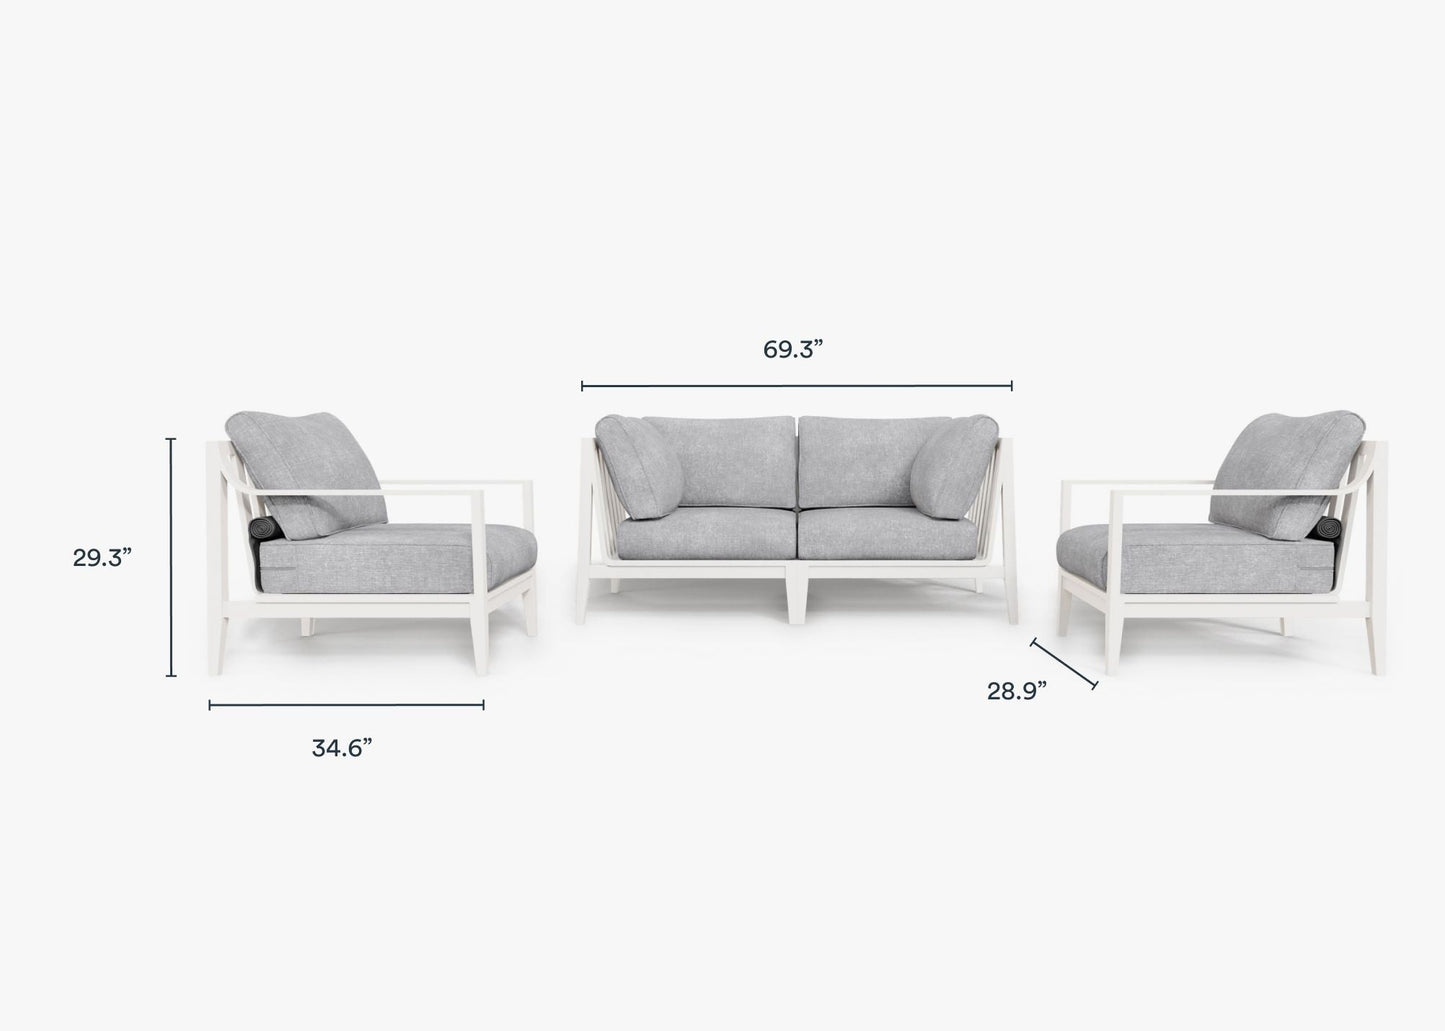 Live Outer 69" White Aluminum Outdoor Loveseat With Armchairs & Pacific Fog Gray Cushion (4-Seat)